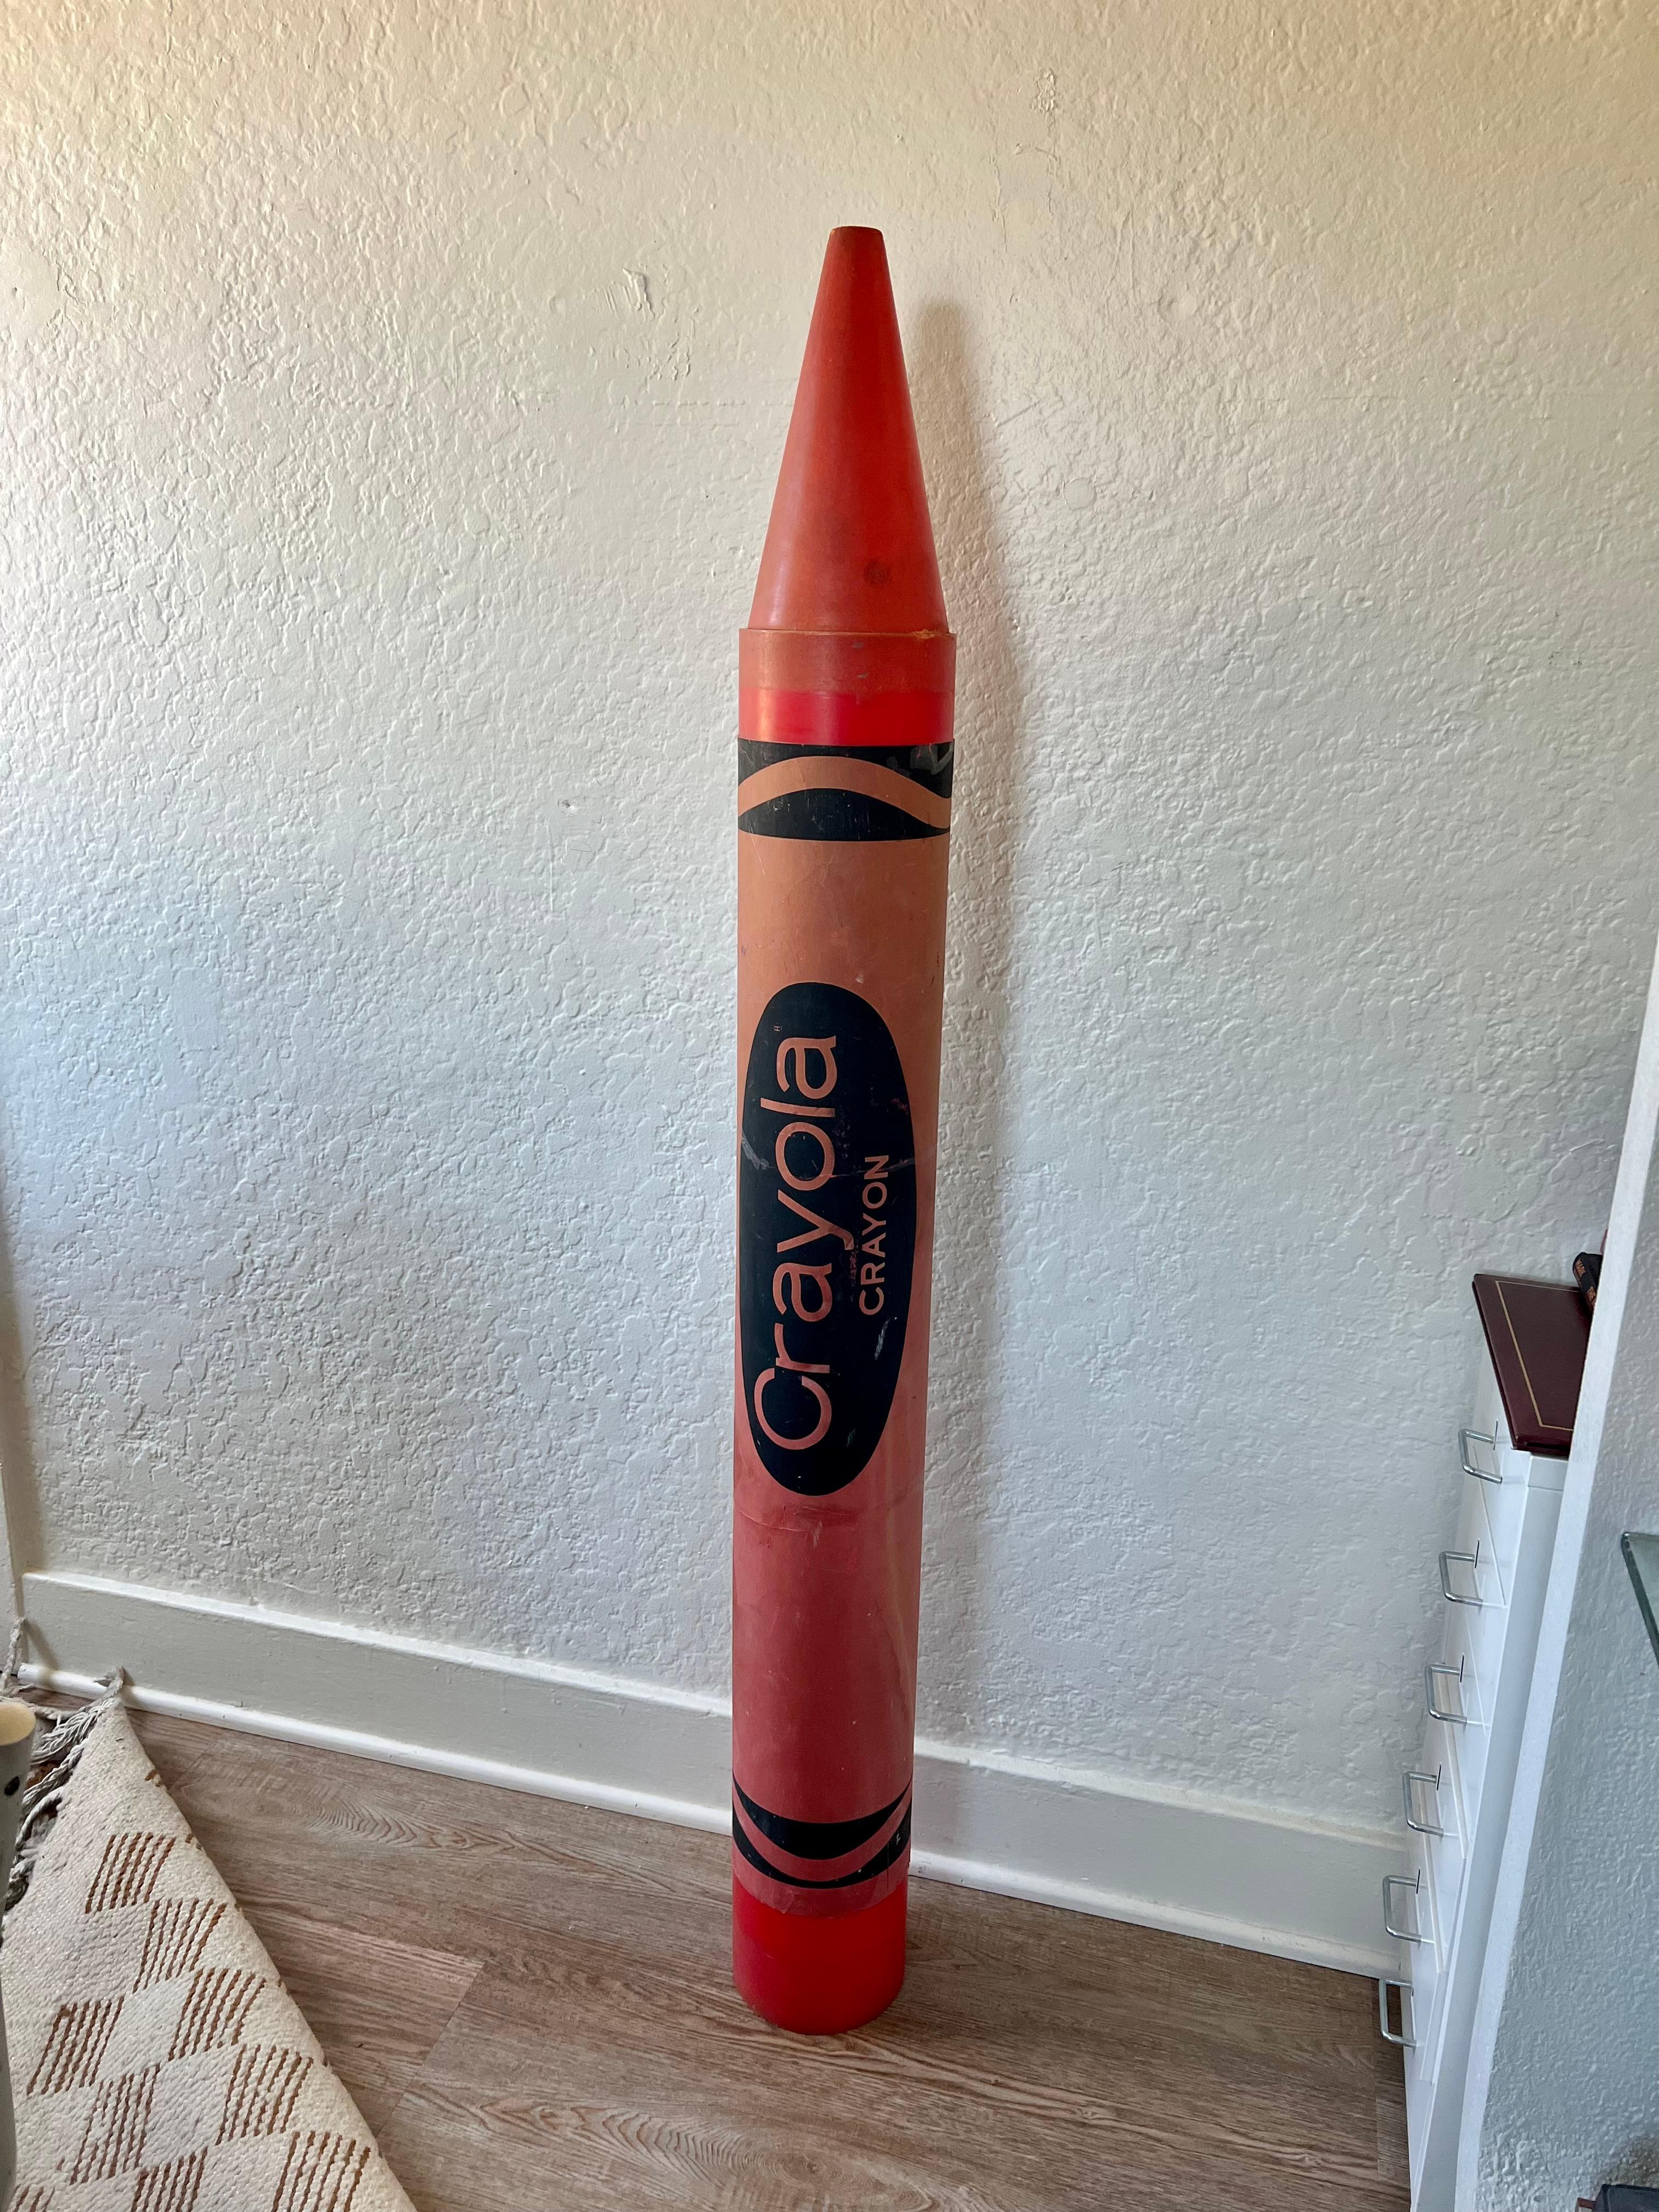 Original Monumental Giant Crayola Crayon by Binney & Smith in conjunction with THINK BIG! condition is fair. The wrapper has been trimmed to use original paper to graft holes and parts with more wear. Some spots and fading. Priced accordingly and